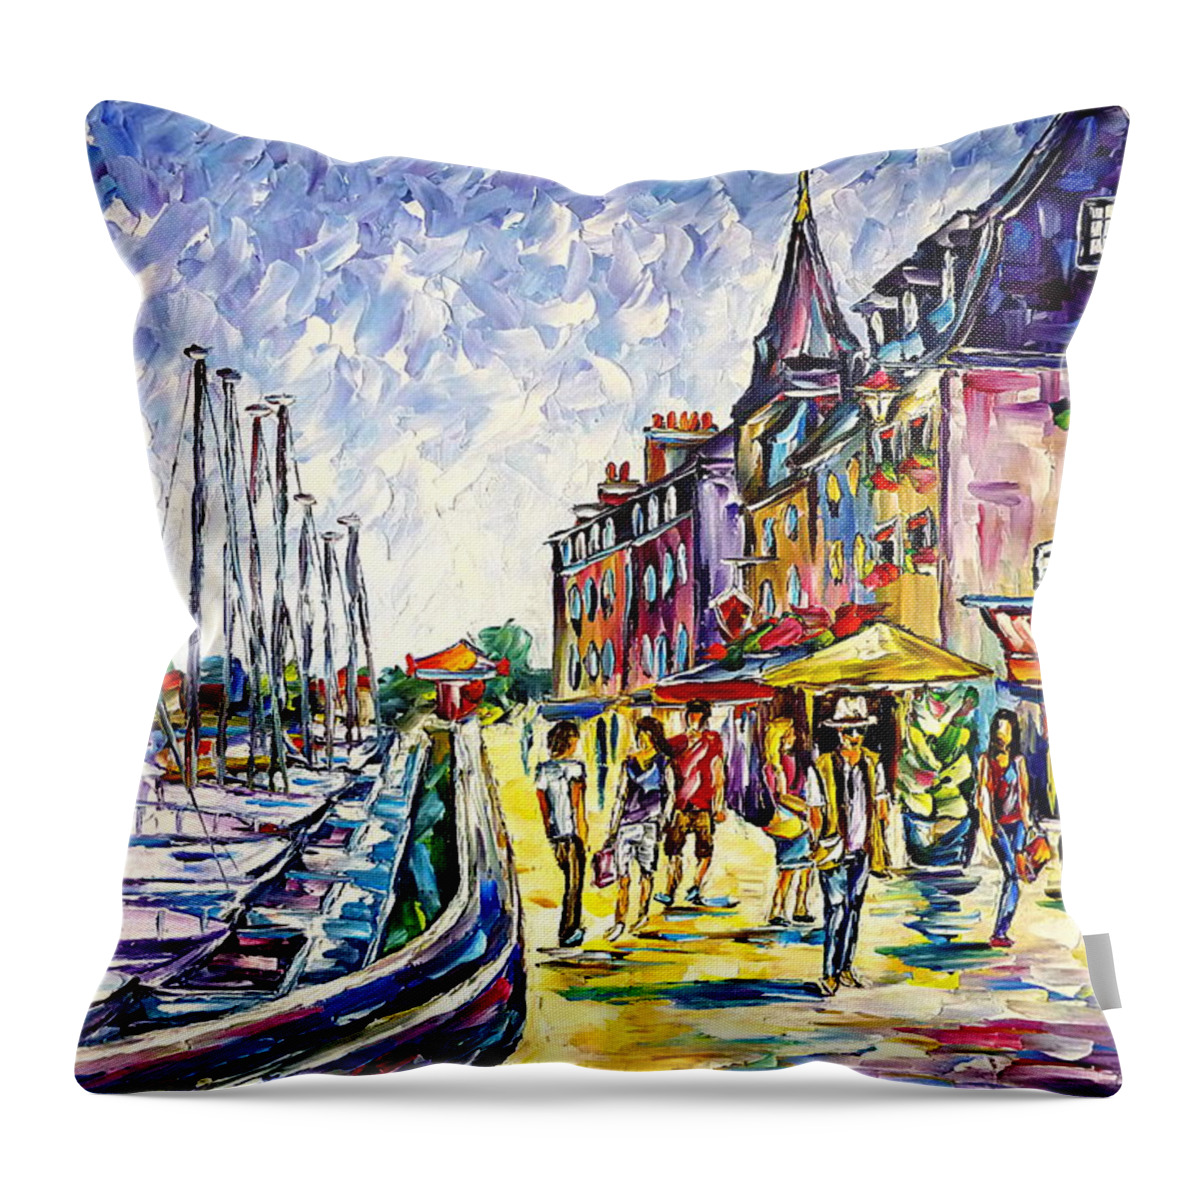 Harbor Painting Throw Pillow featuring the painting At The Harbor Of Honfleur by Mirek Kuzniar